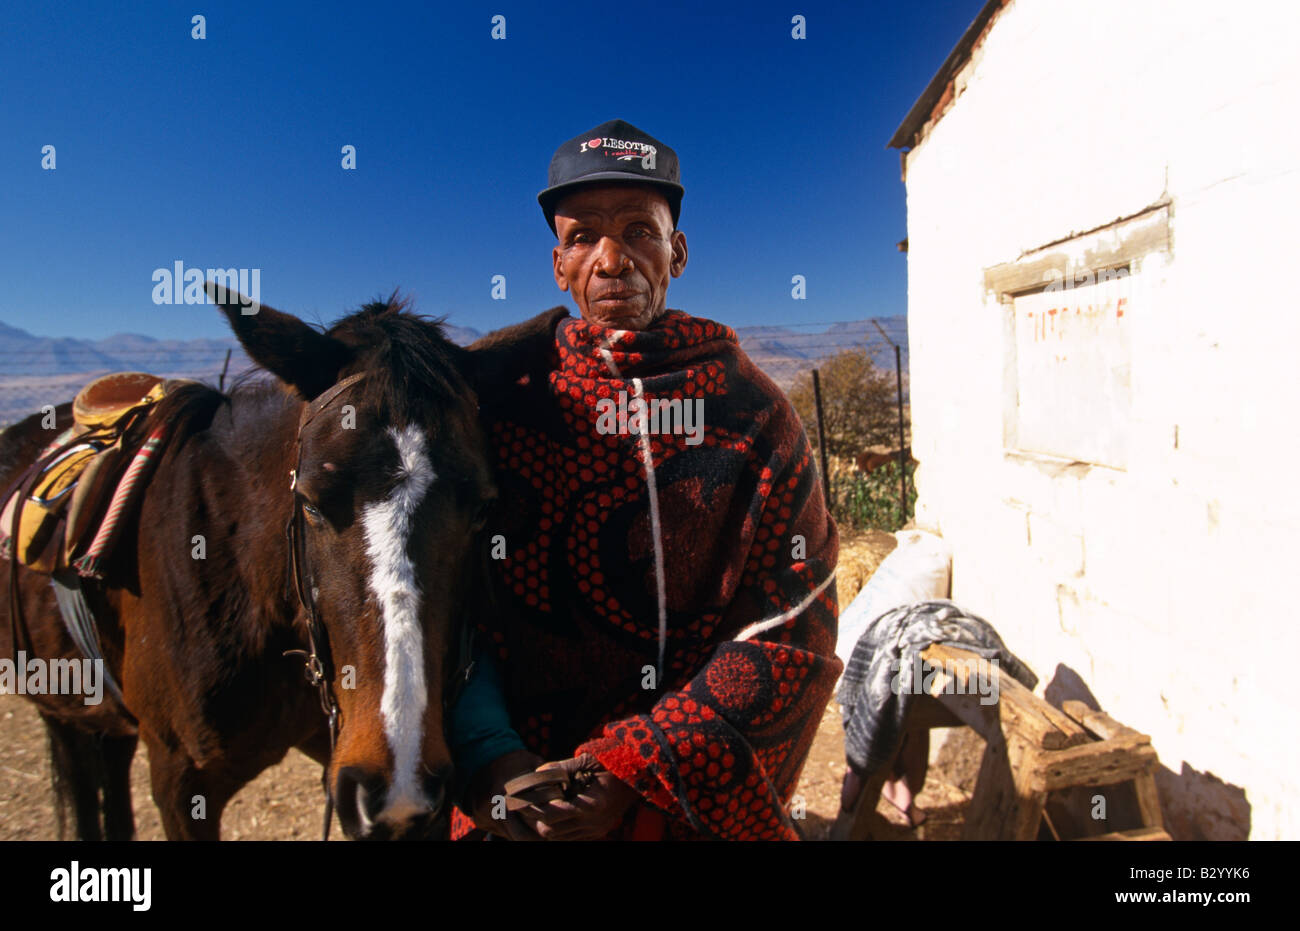 Farmer and horse in farm, Lesotho, Africa Stock Photo